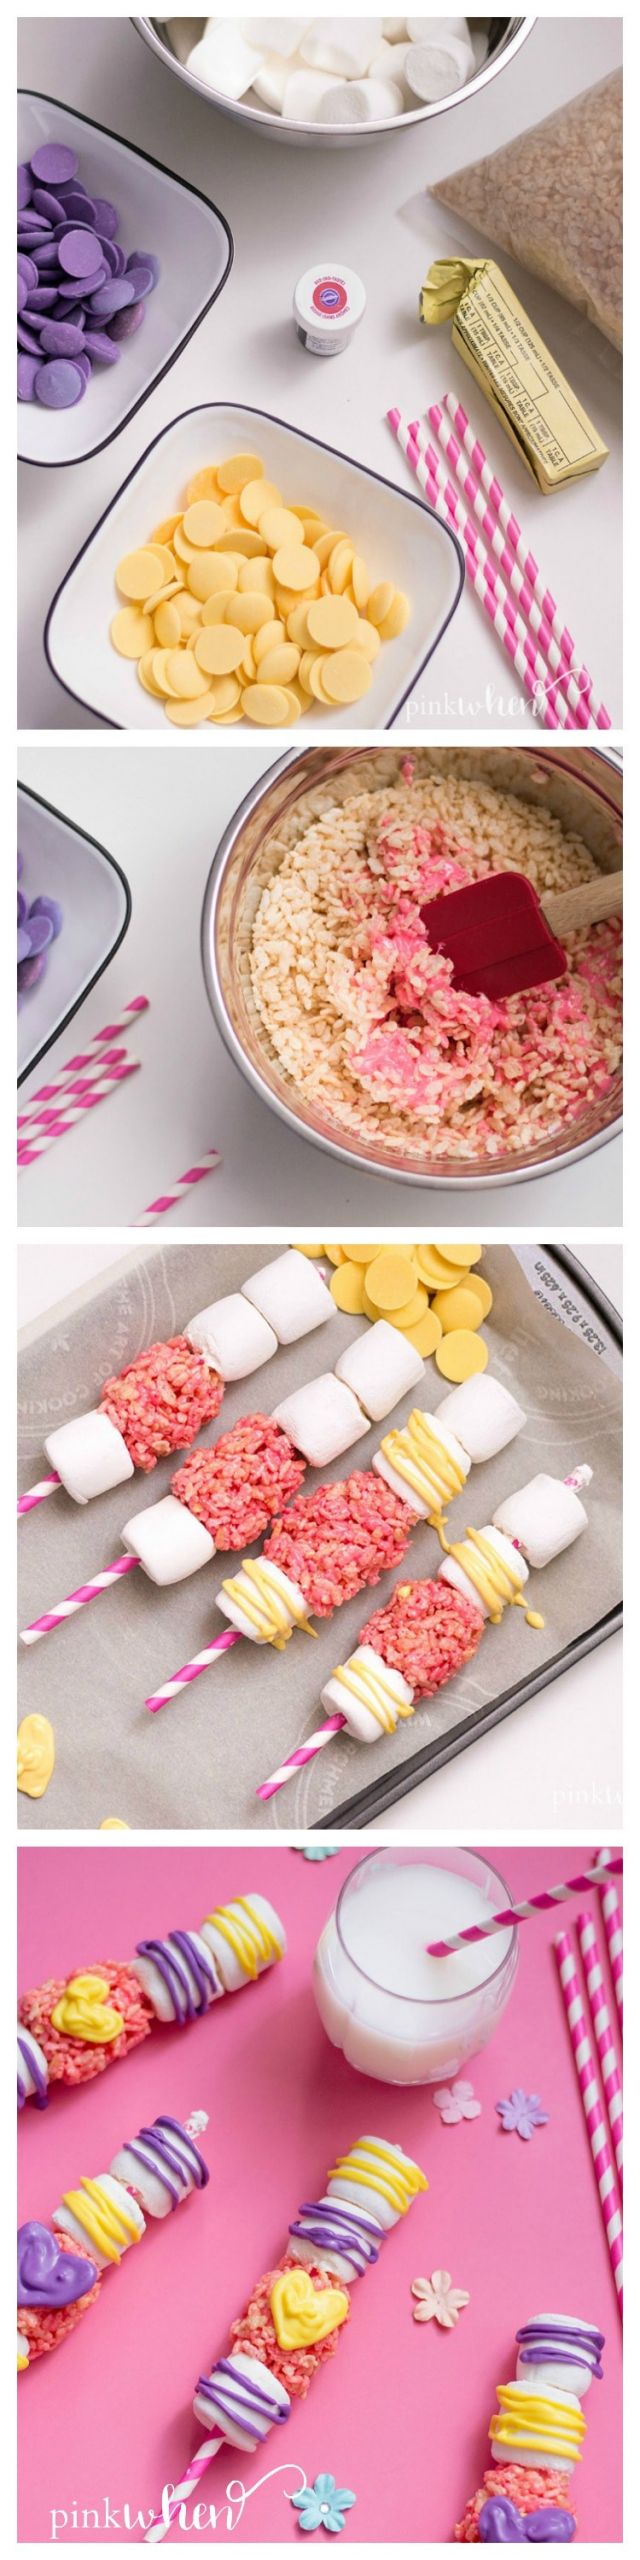 Desserts For Mothers Day
 Mothers Day Dessert Skewers PinkWhen